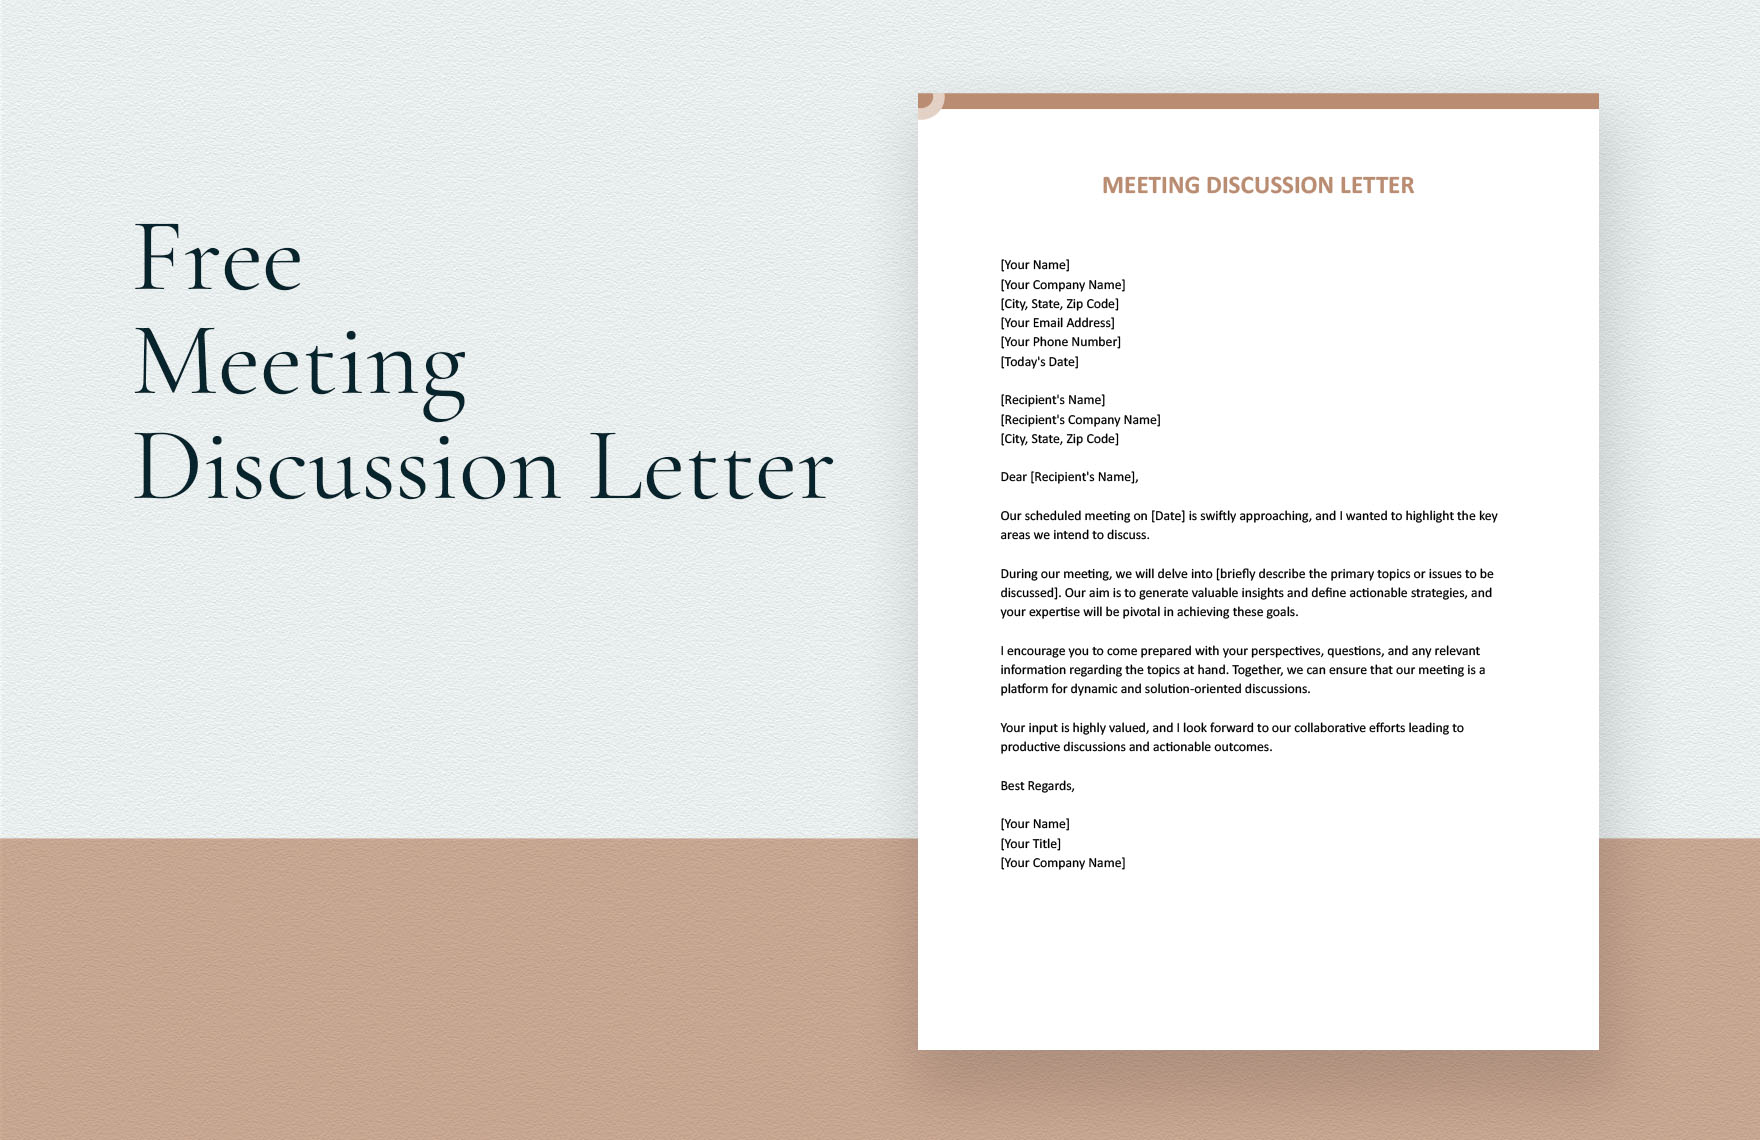 Meeting Discussion Letter